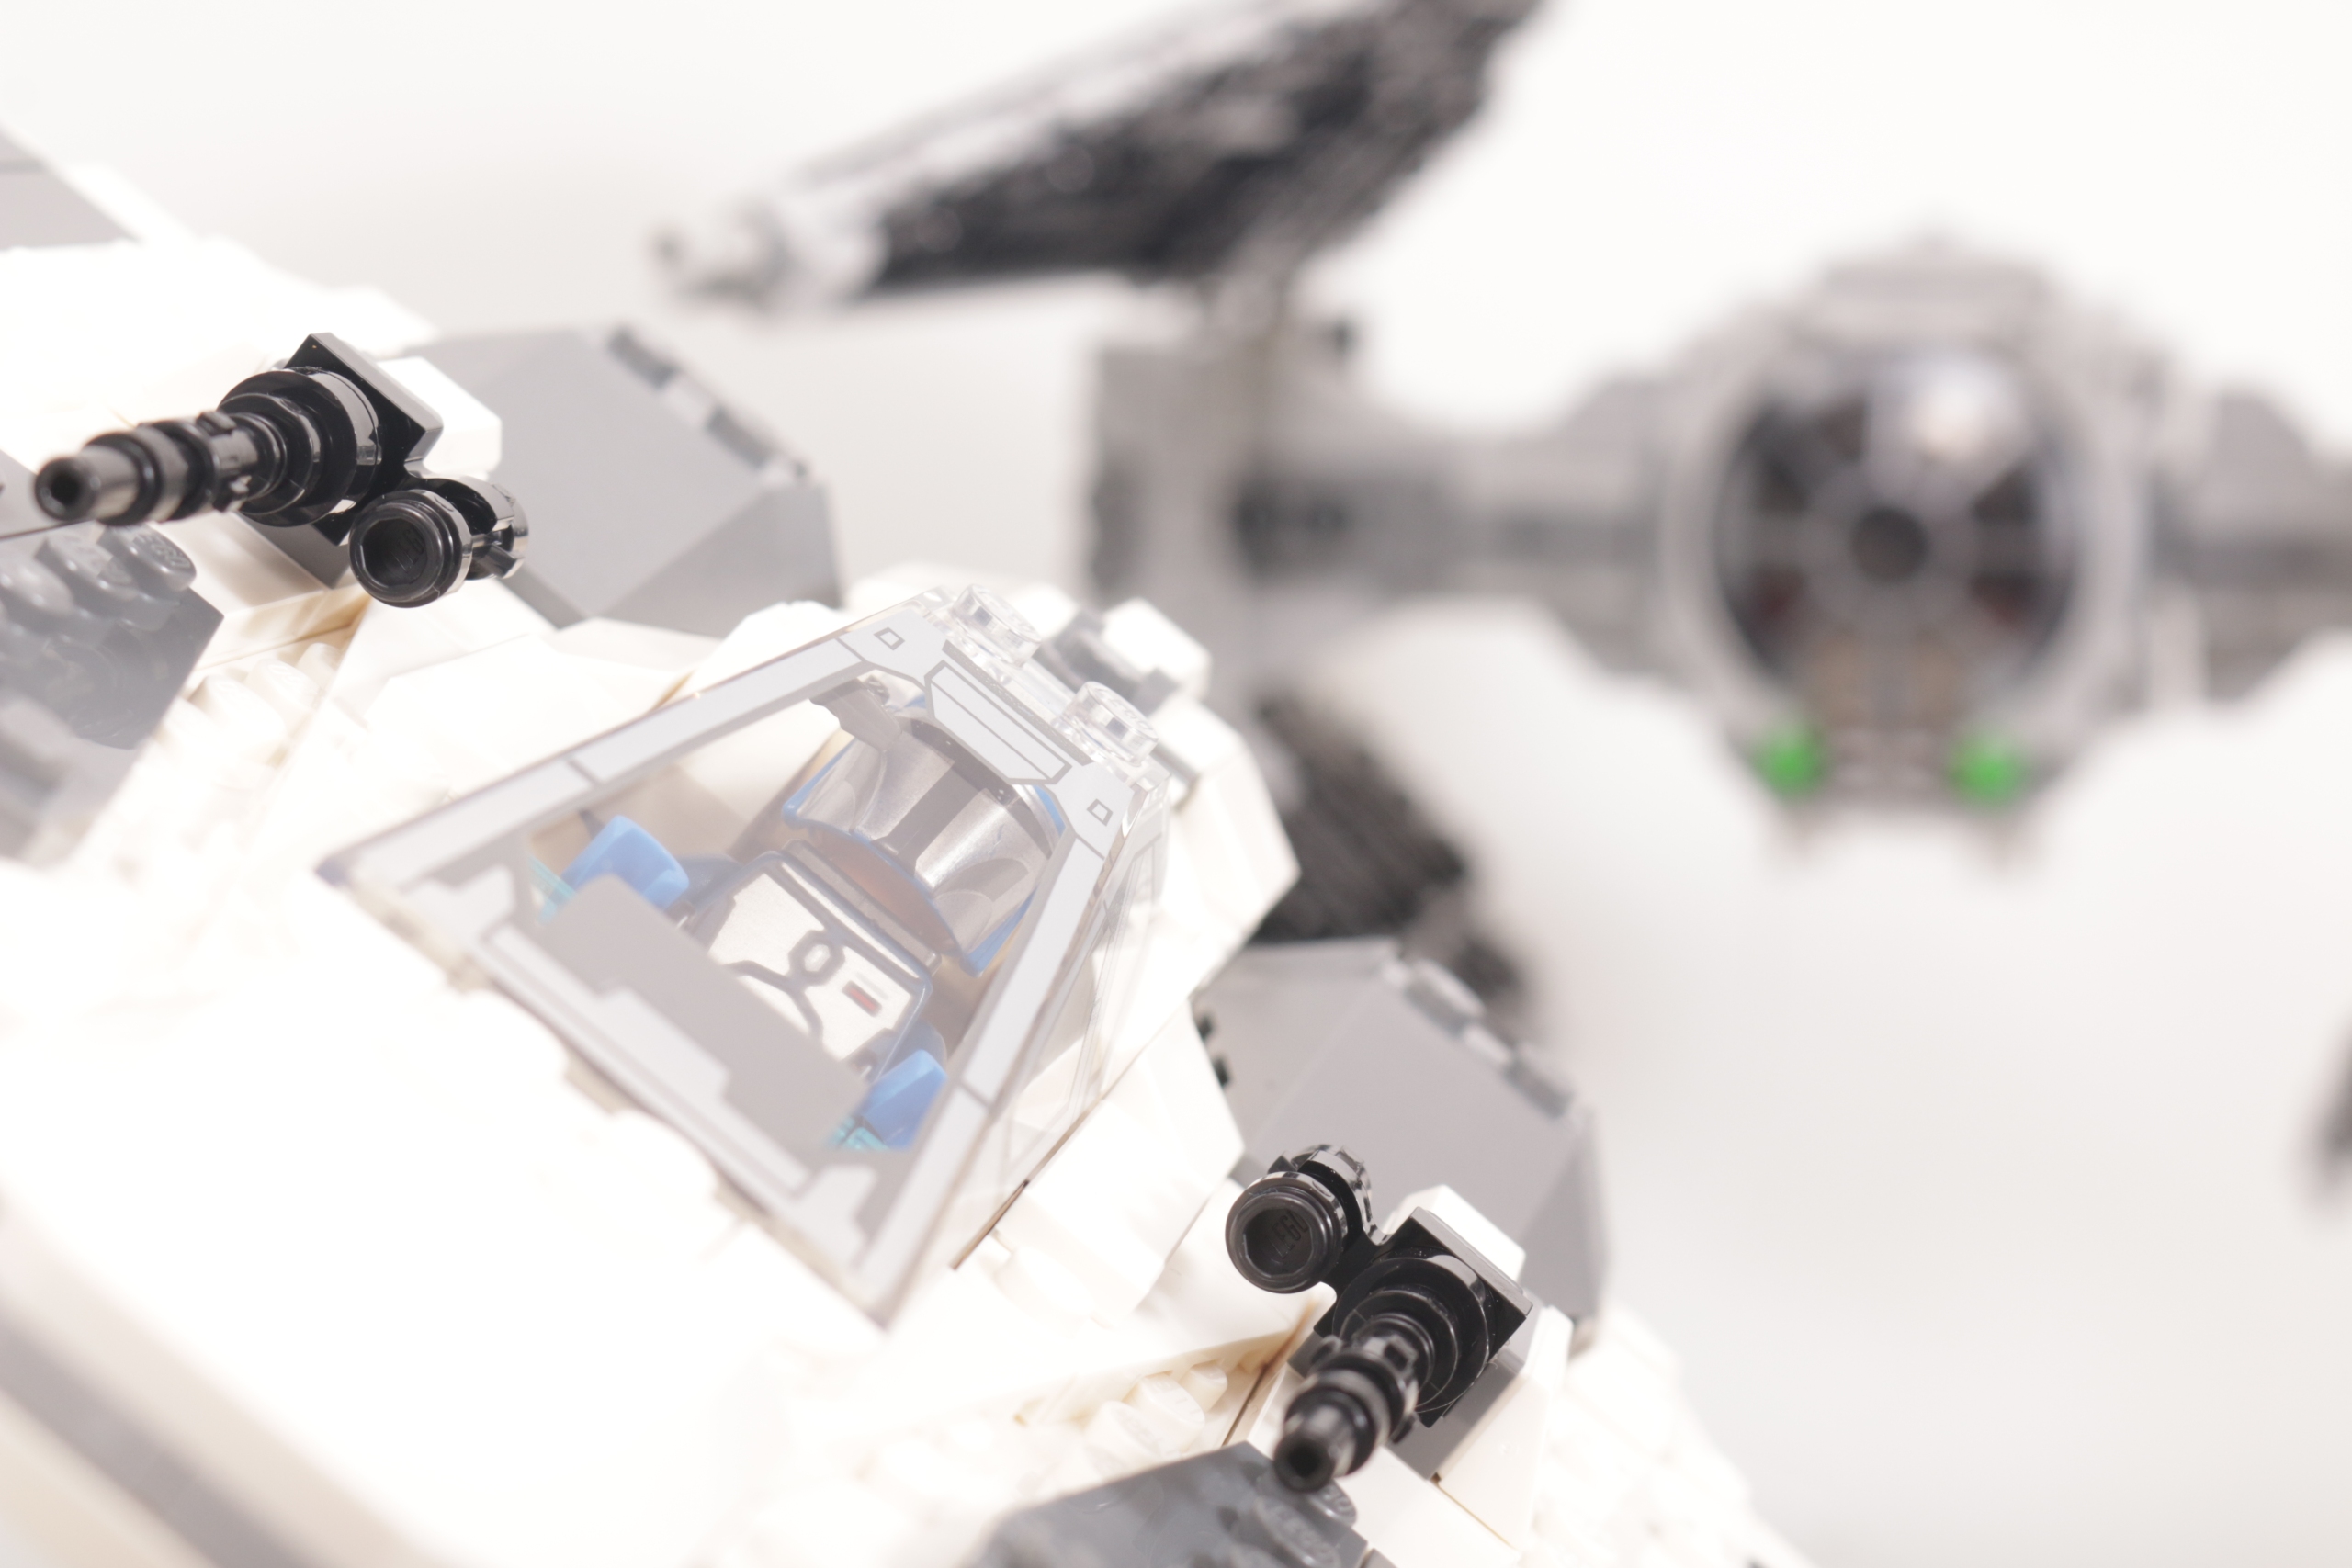 LEGO Star Wars 75348 Mandalorian Fang Fighter vs. TIE Interceptor review 9 scaled